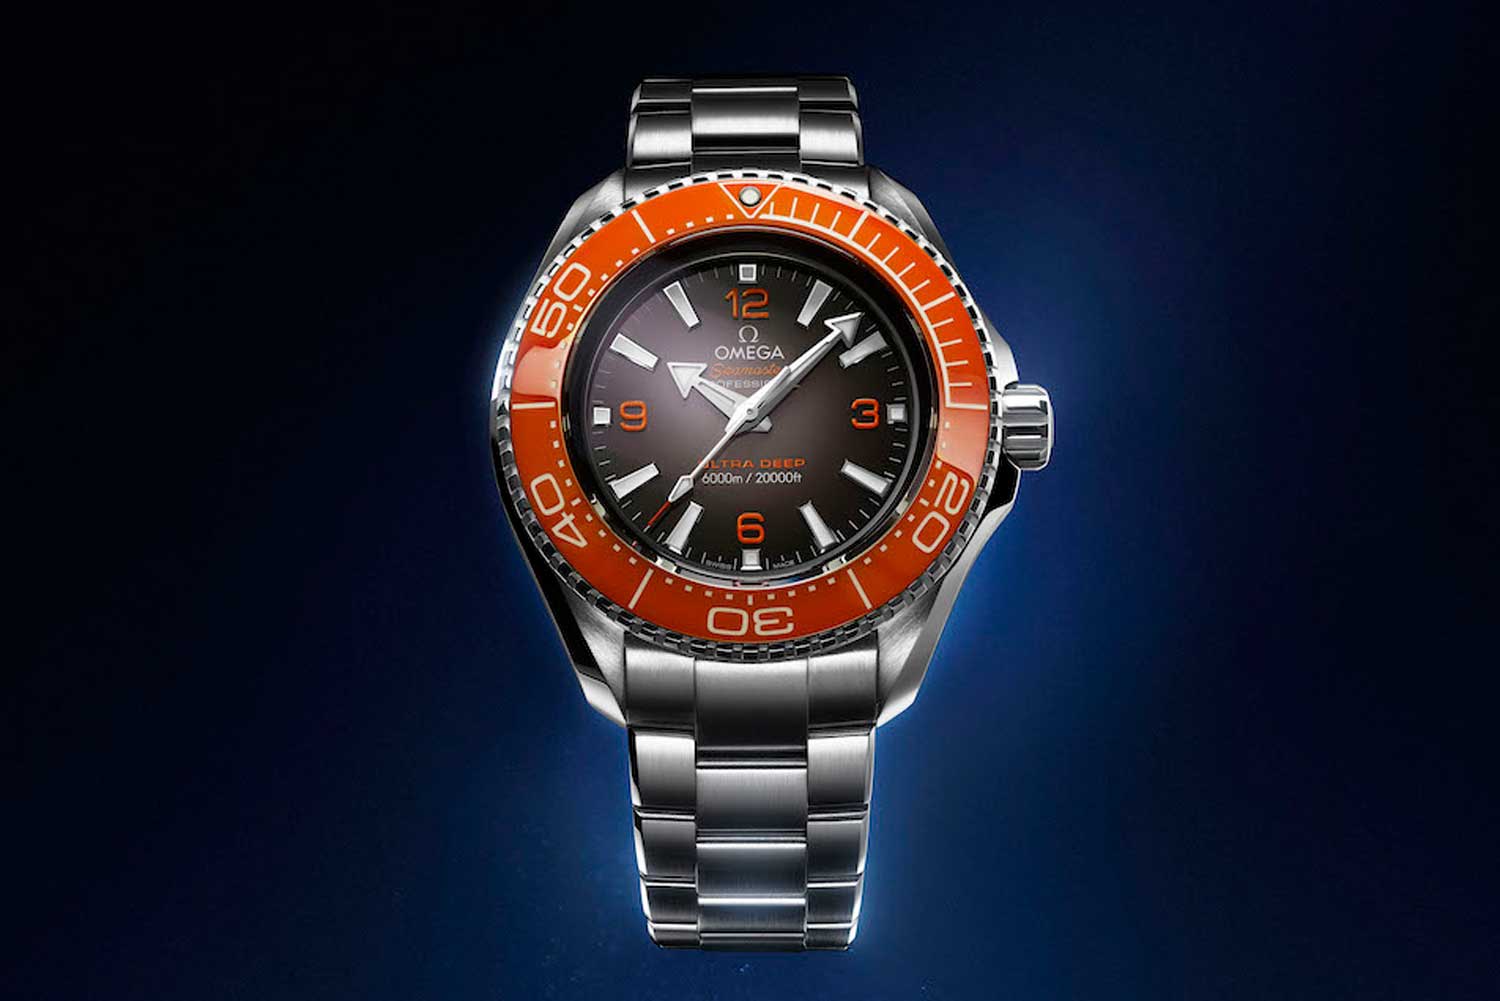 An orange on black colour scheme reminiscent of references from the standard 600m Planet Ocean line. (Image: Omega)